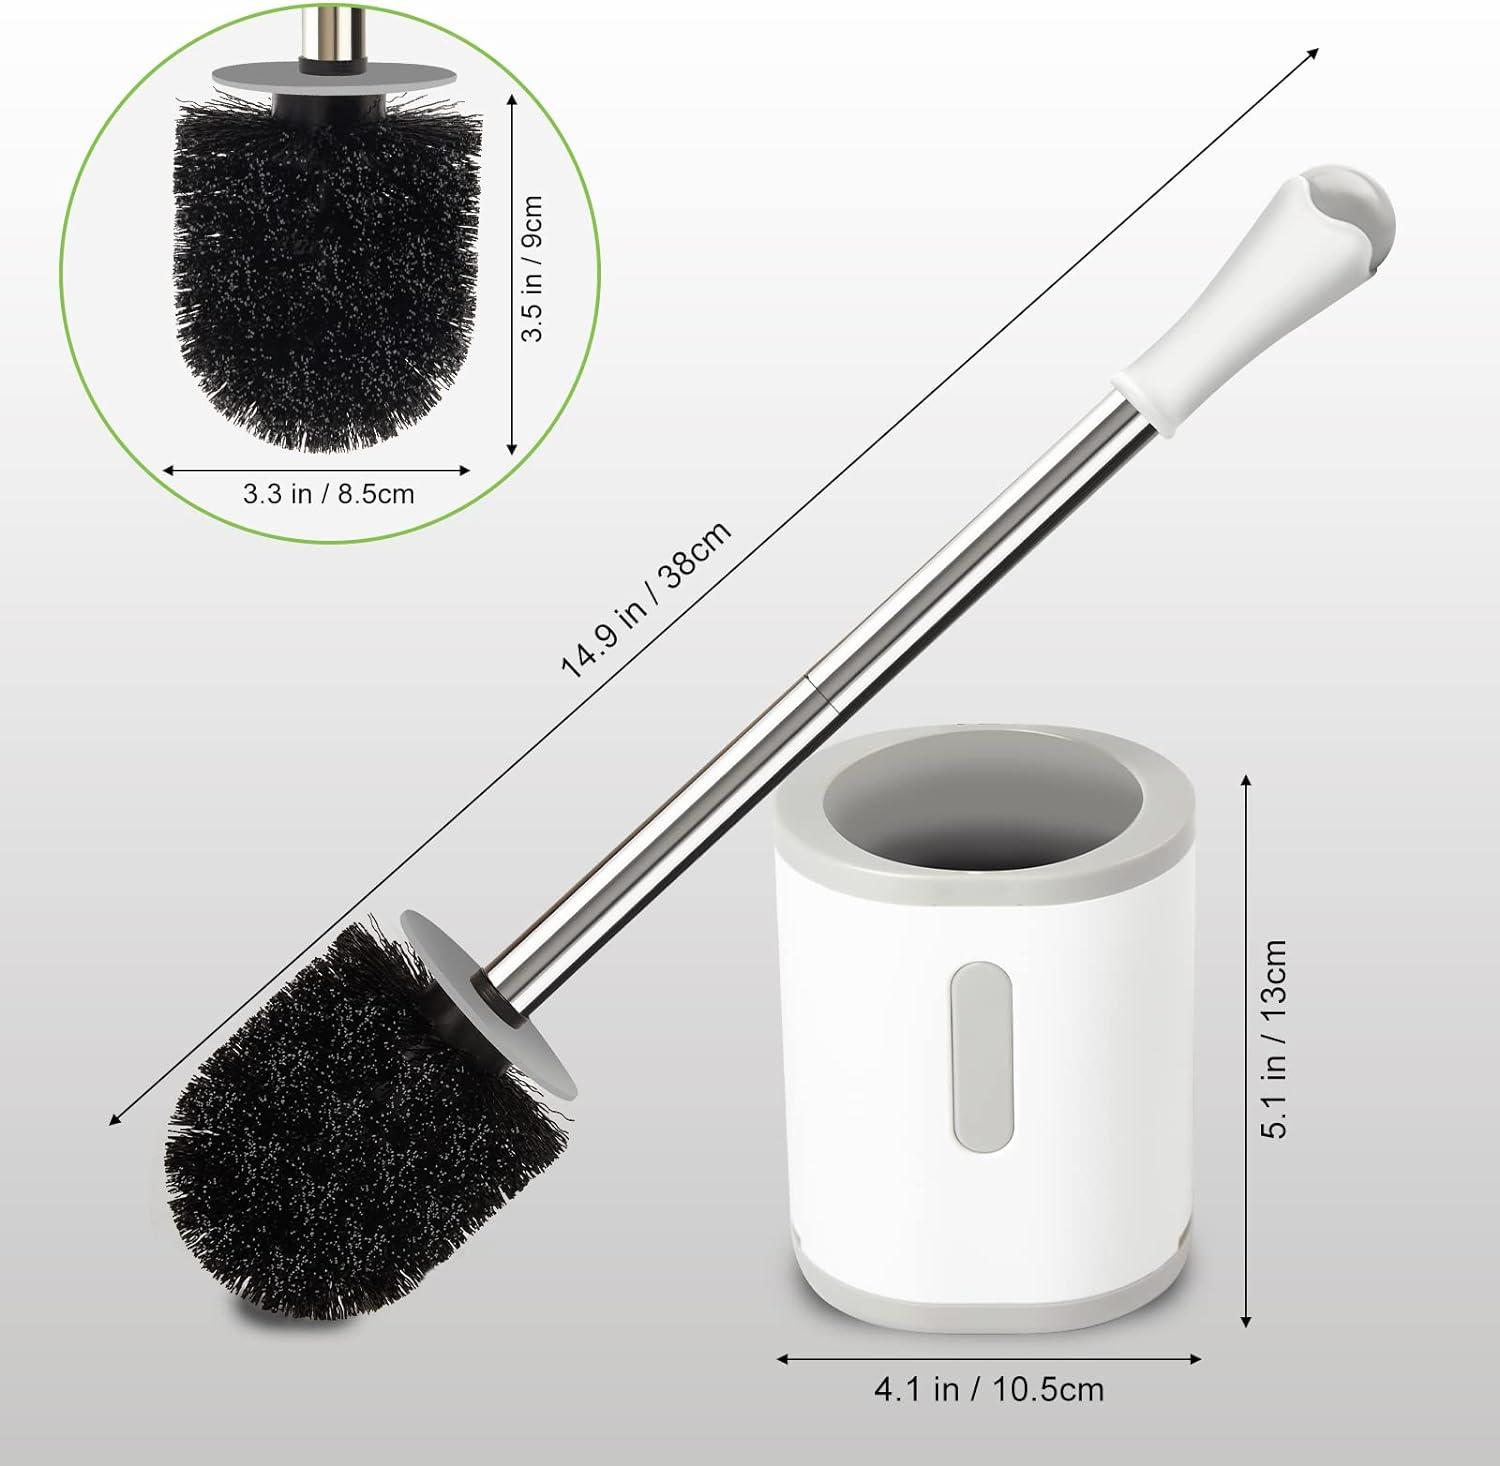  Small Cleaning Brushes for Household Cleaning Deep